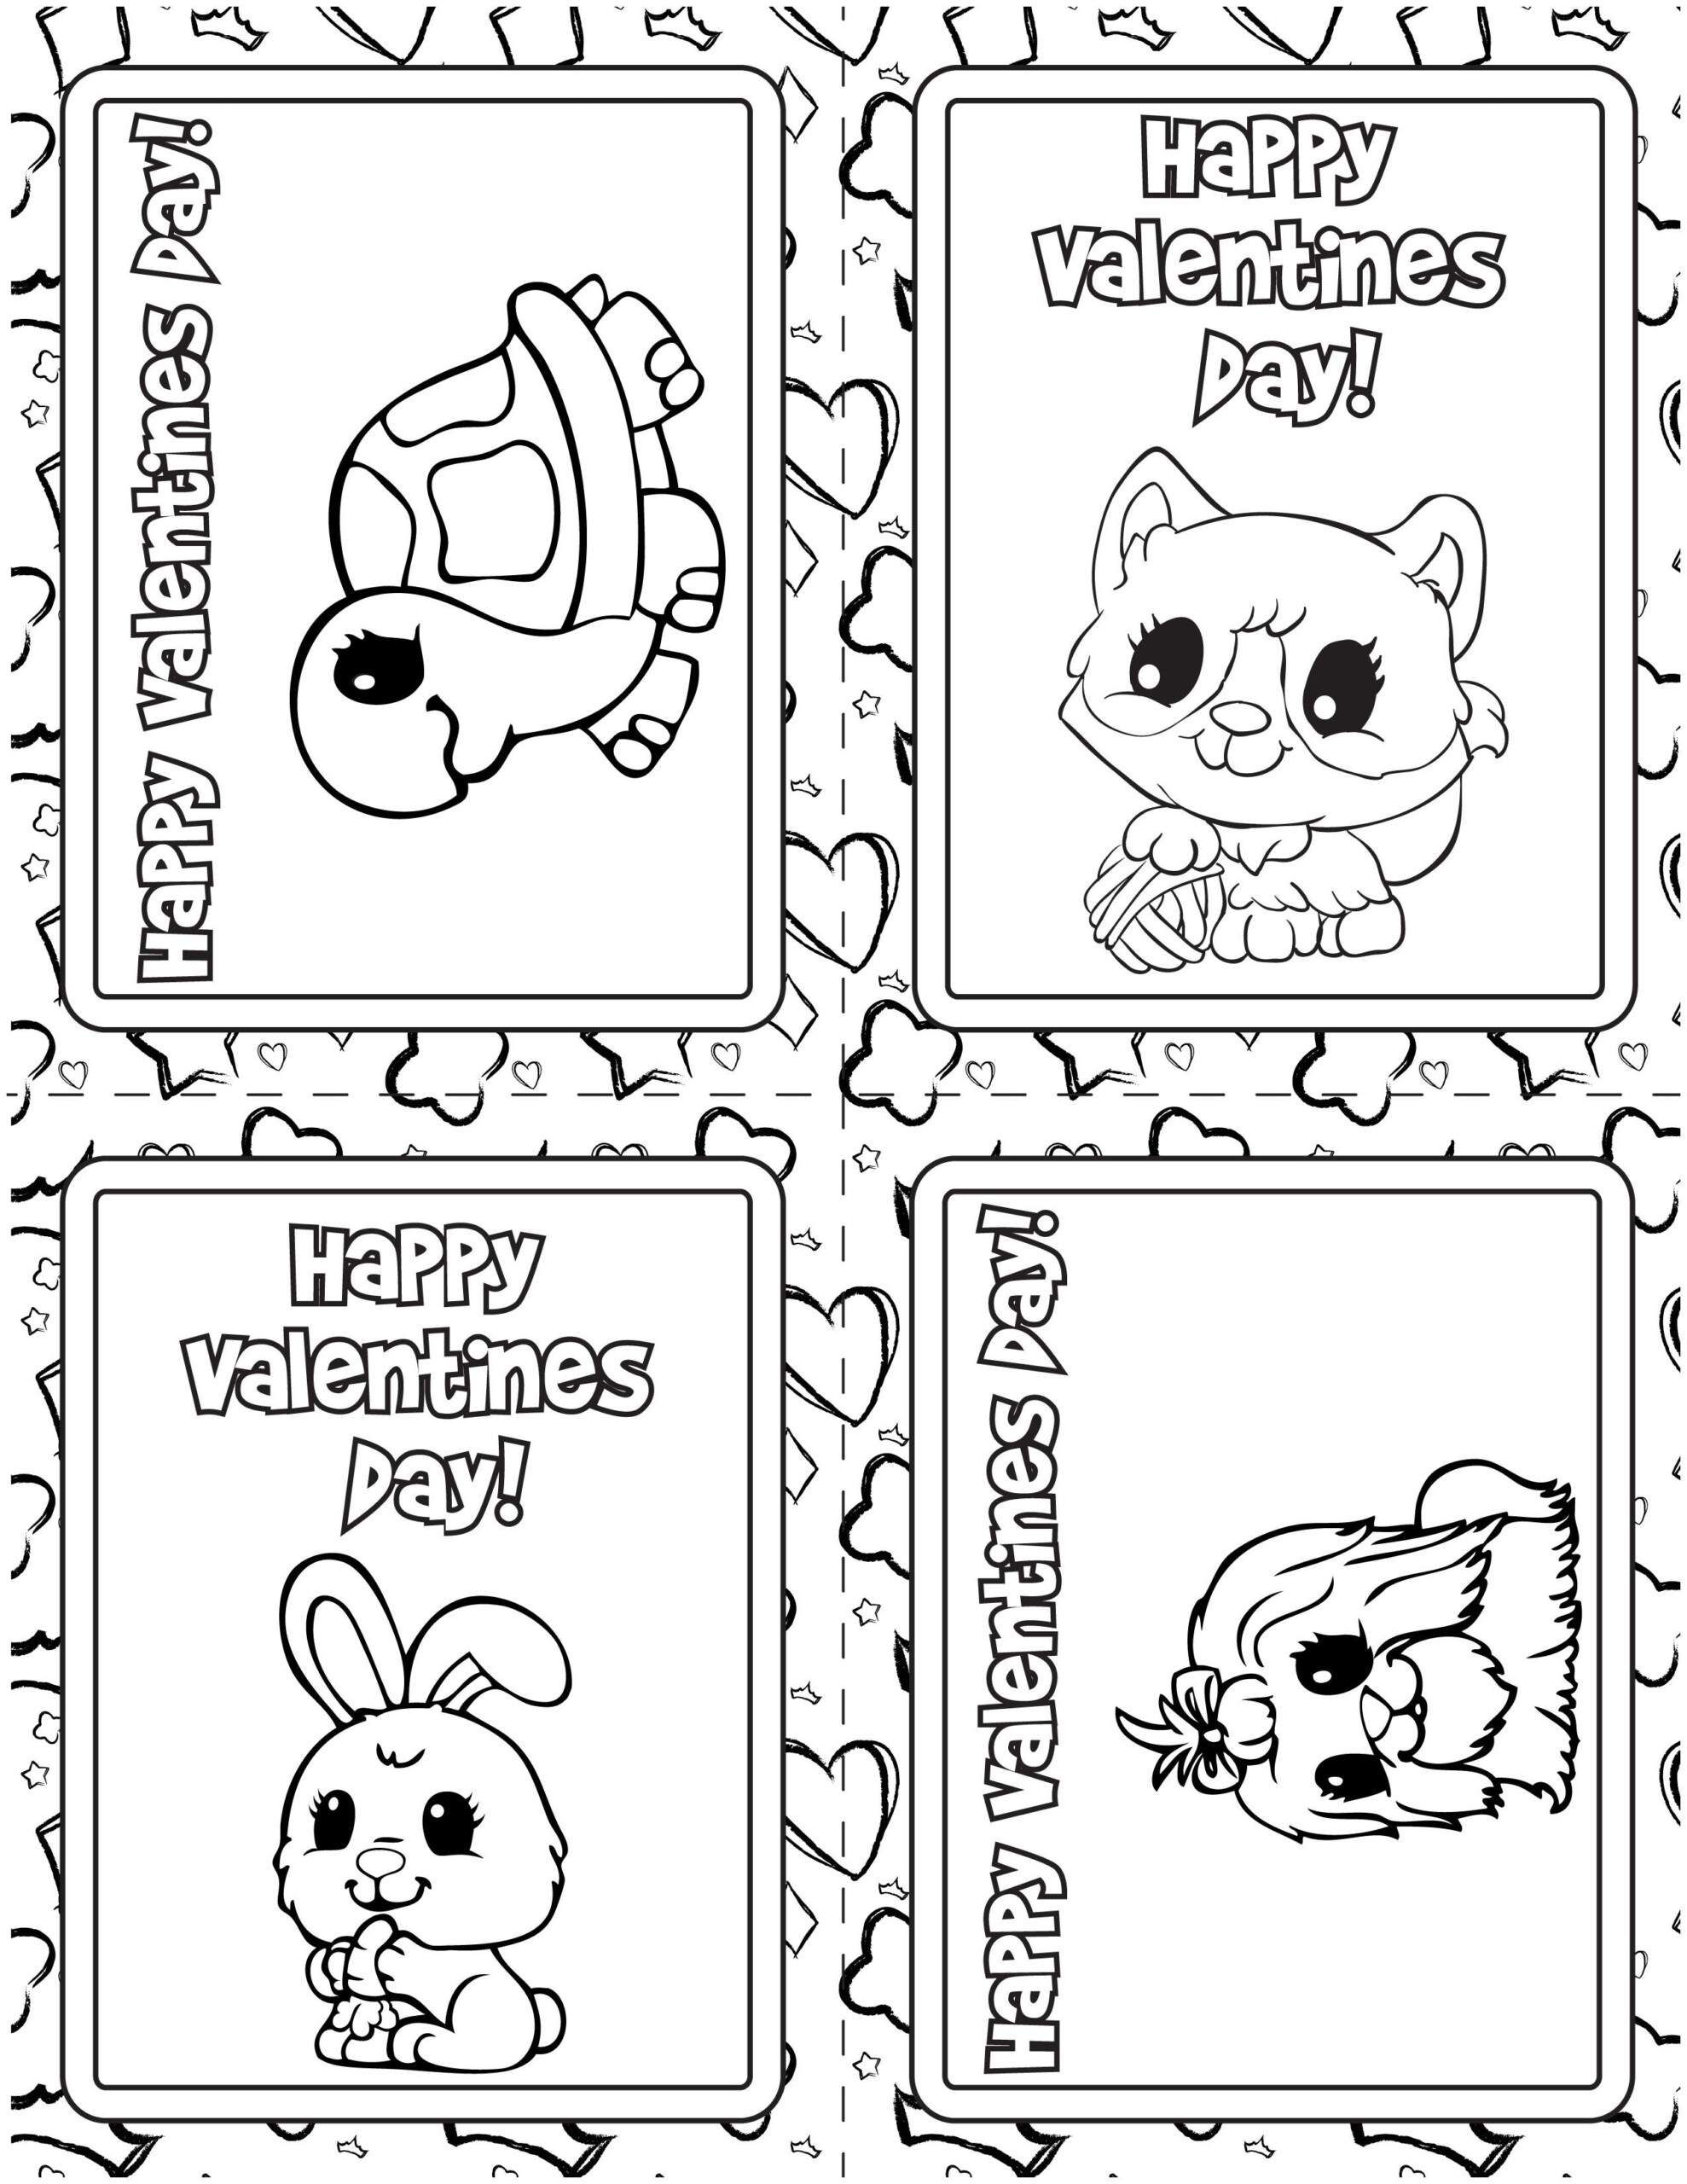 Free Printable Valentine Cards To Color Printable Valentine Cards For